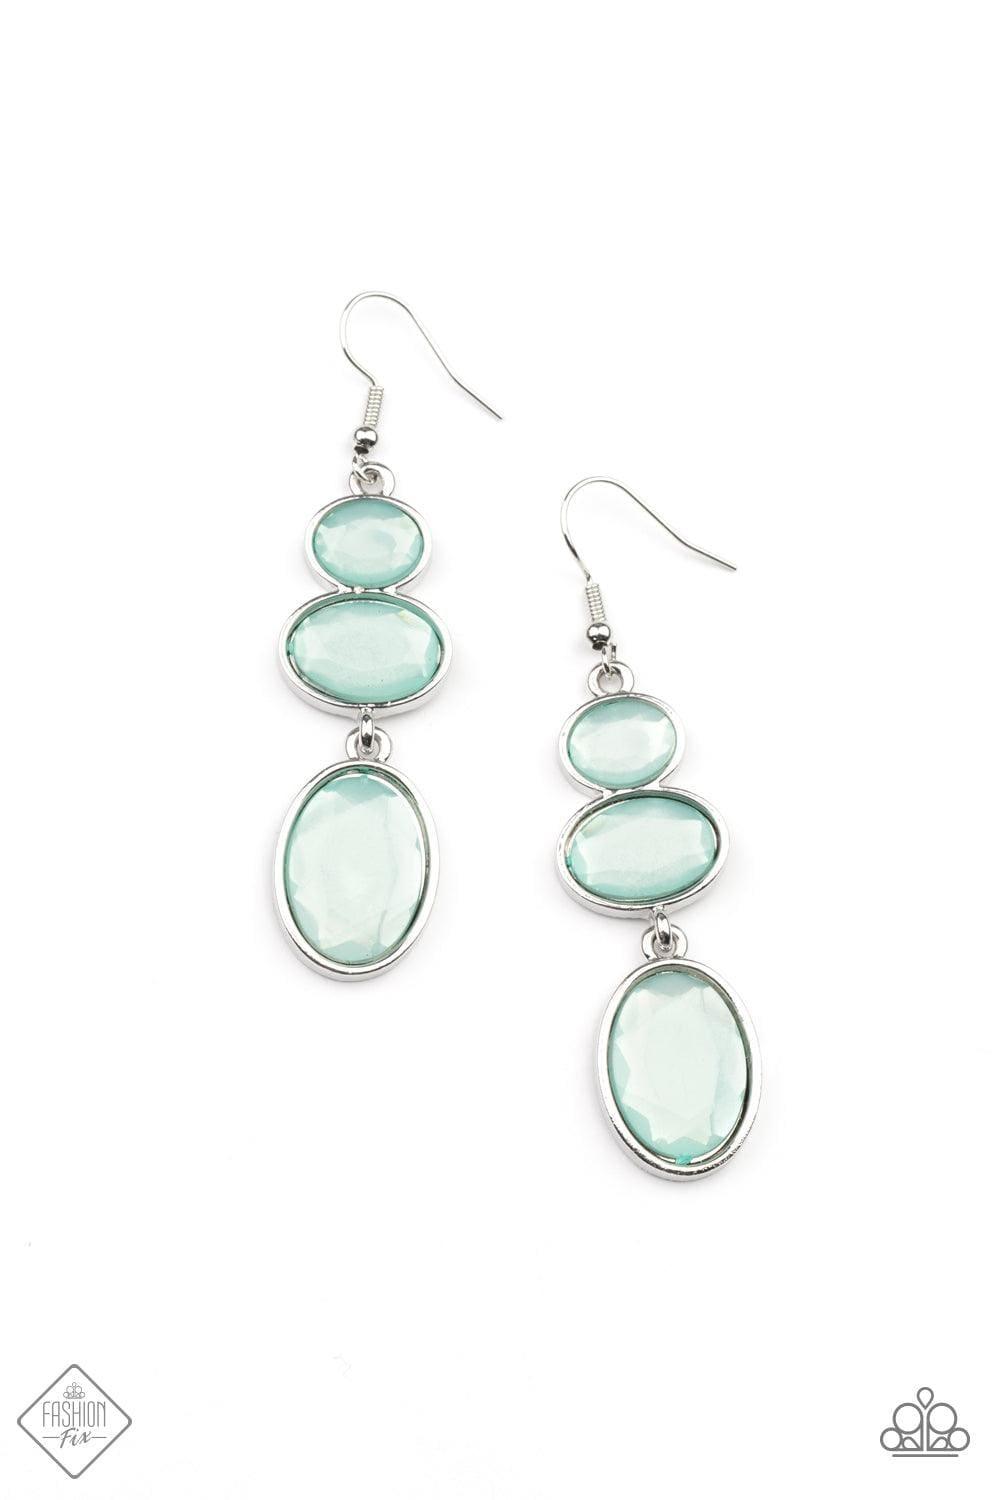 Paparazzi Accessories - Tiers Of Tranquility Blue Earrings - Bling by JessieK